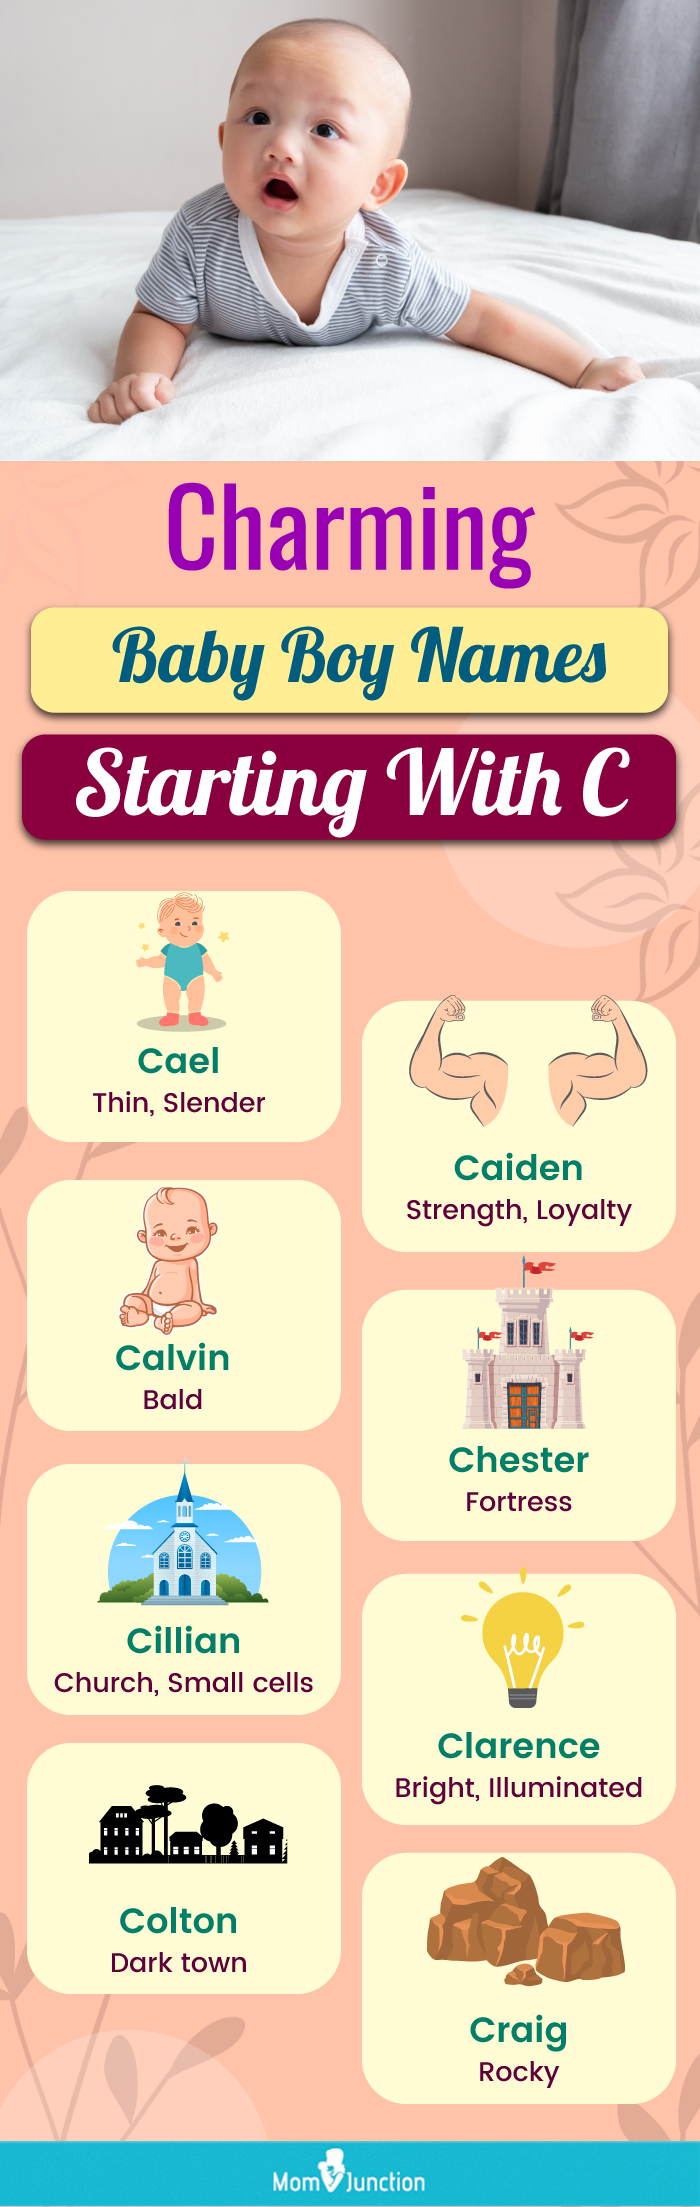 charming baby boy names starting with c (infographic)